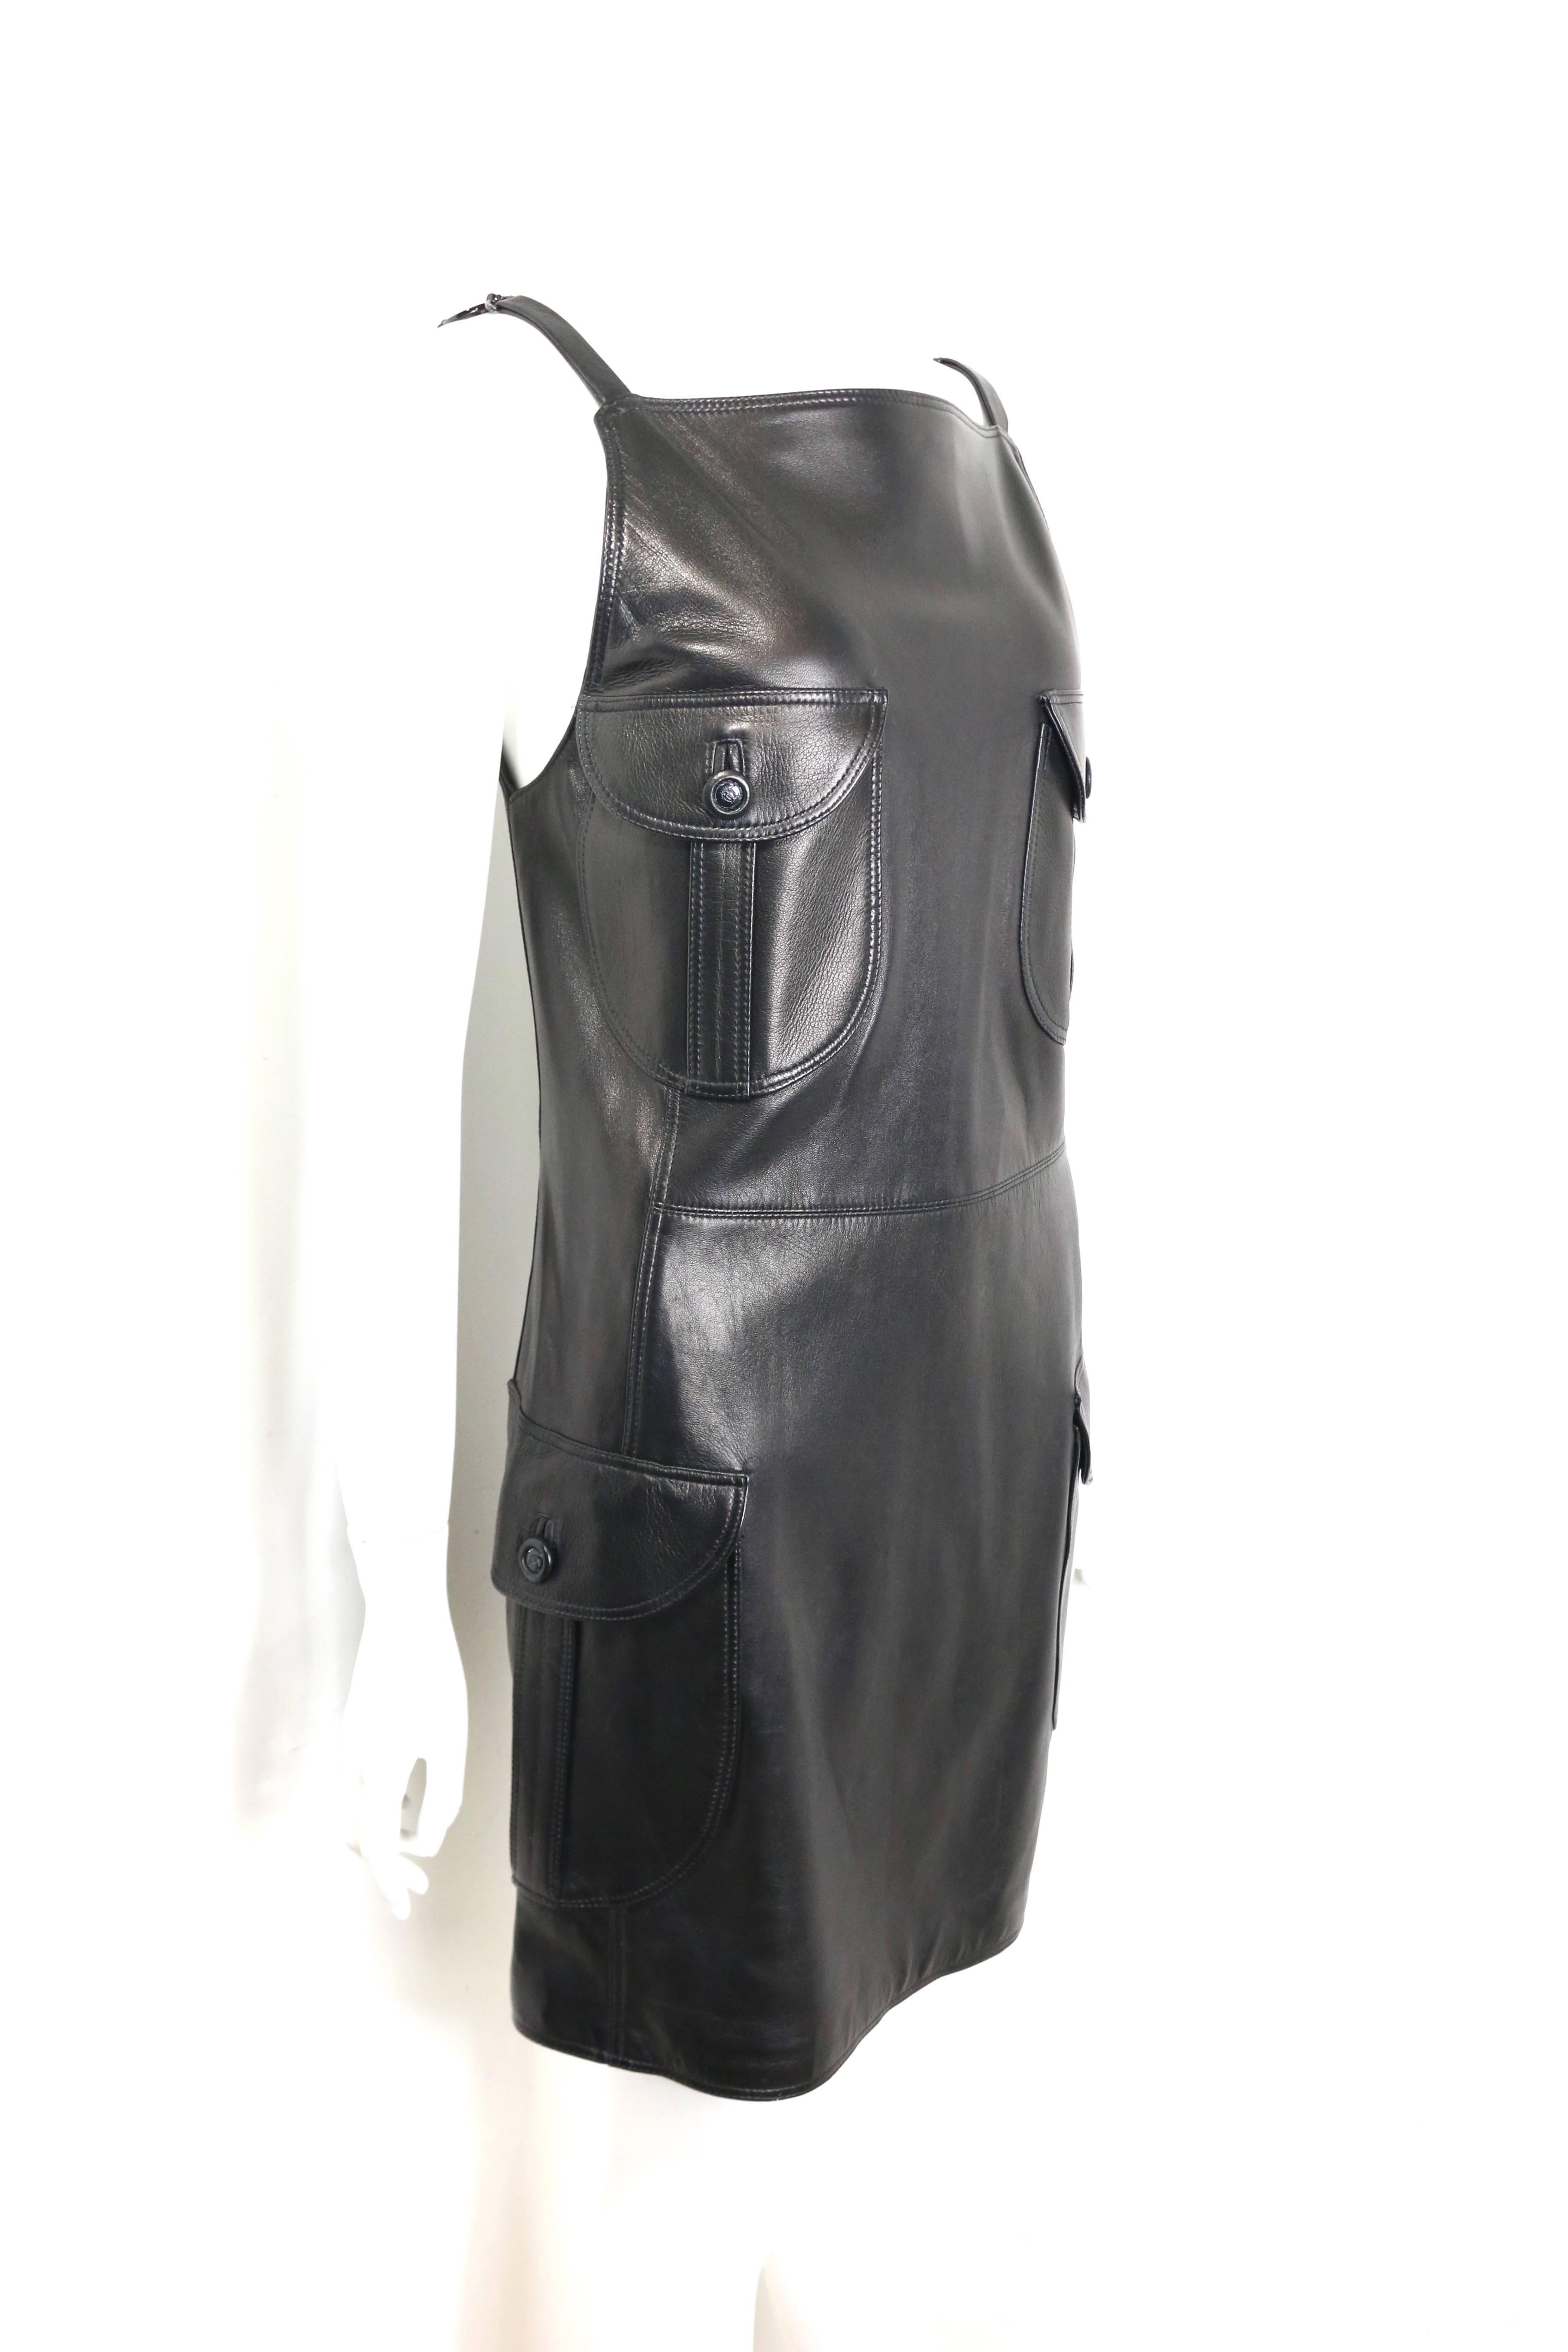 - Vintage 90s iconic Gianni Versace black lambskin leather medusa sleeveless dress. 

- Four front pockets with black 